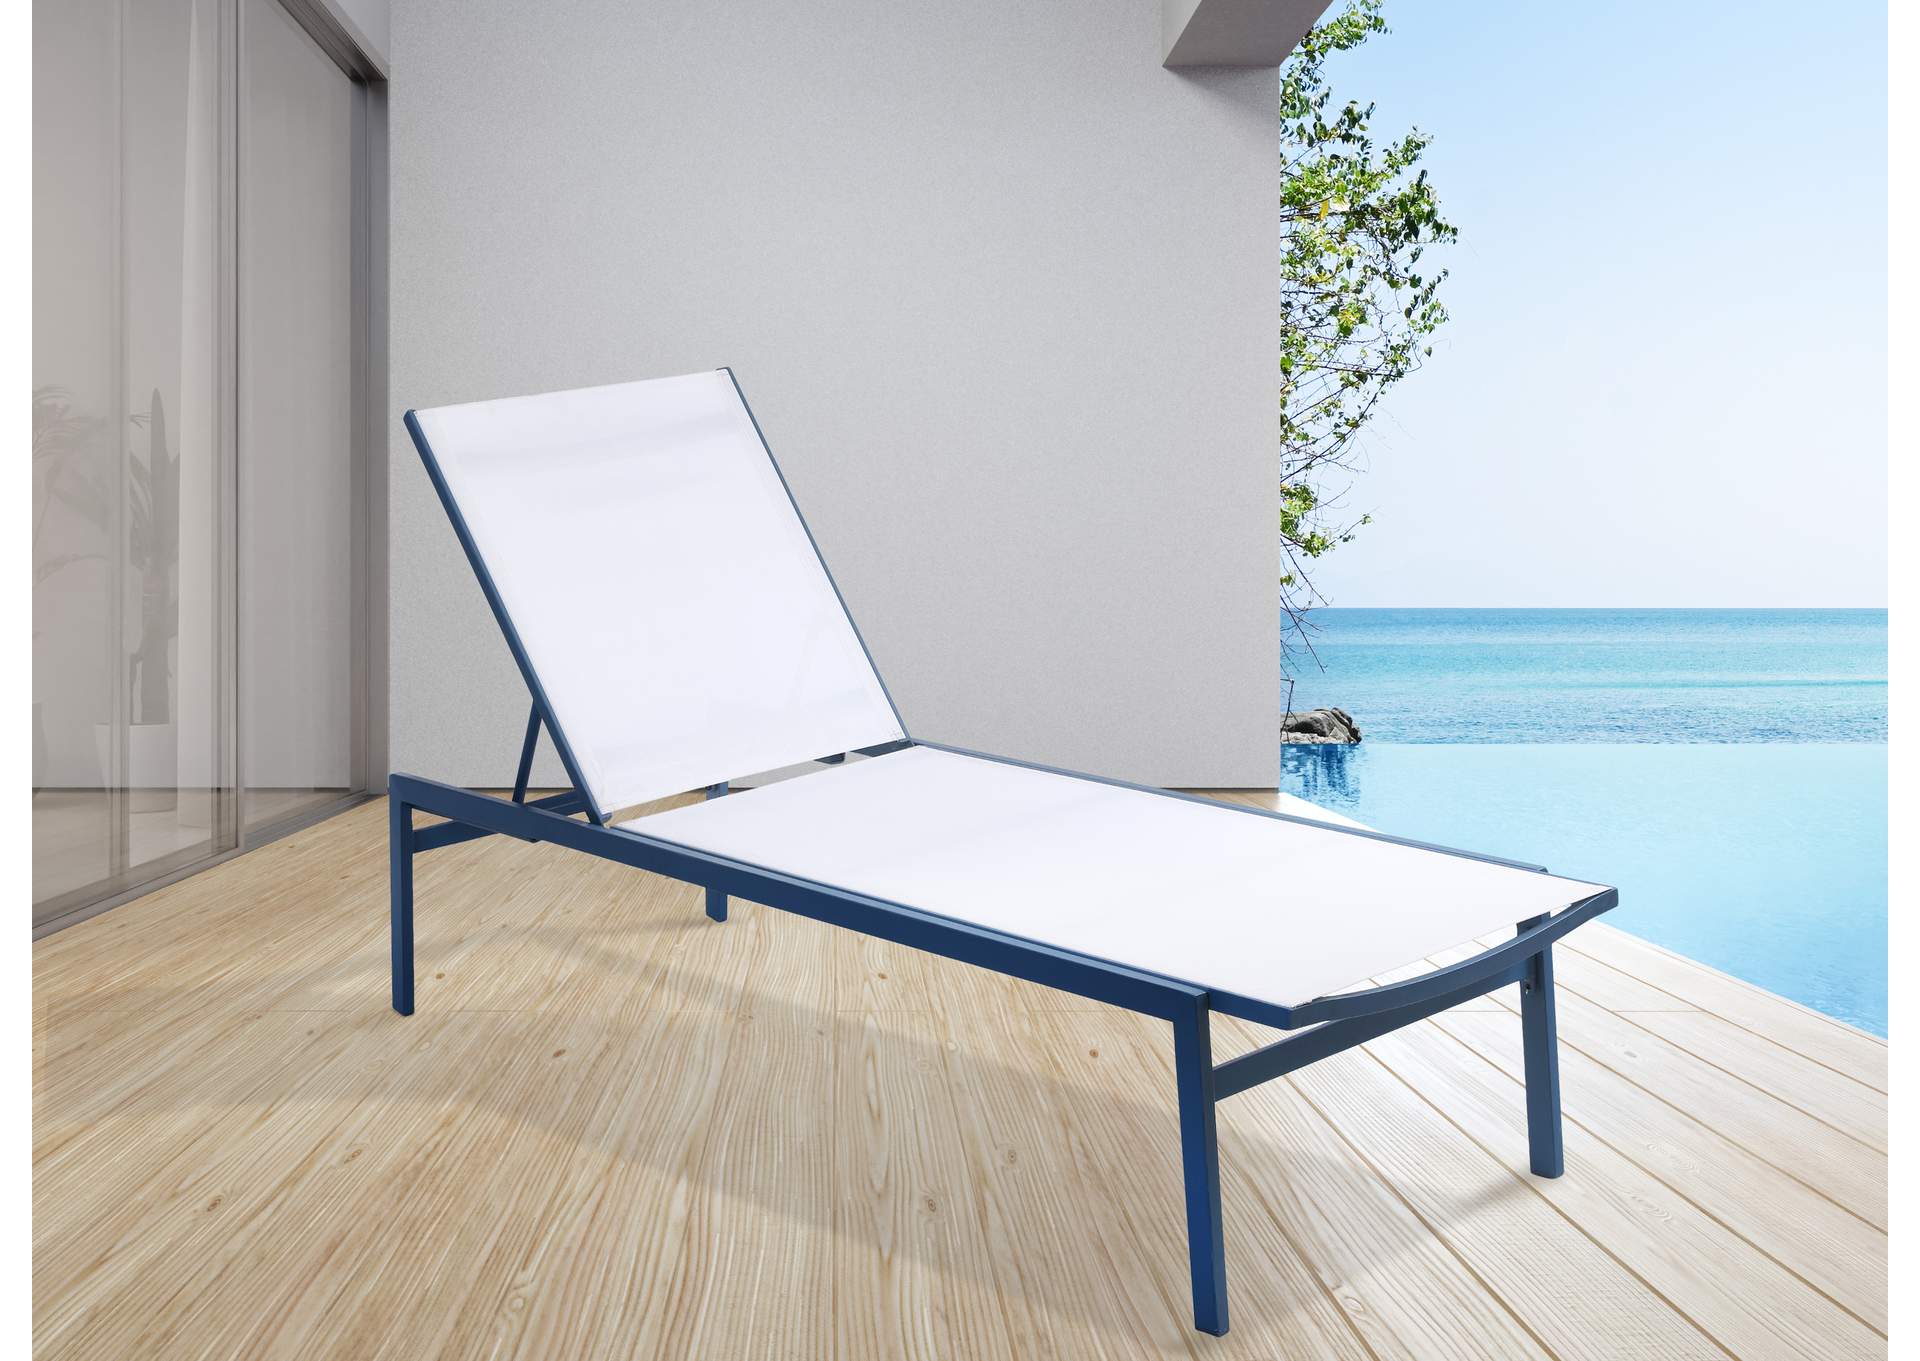 Santorini White Resilient Mesh Water Resistant Fabric Outdoor Patio Aluminum Mesh Chaise Lounge Chair,Meridian Furniture